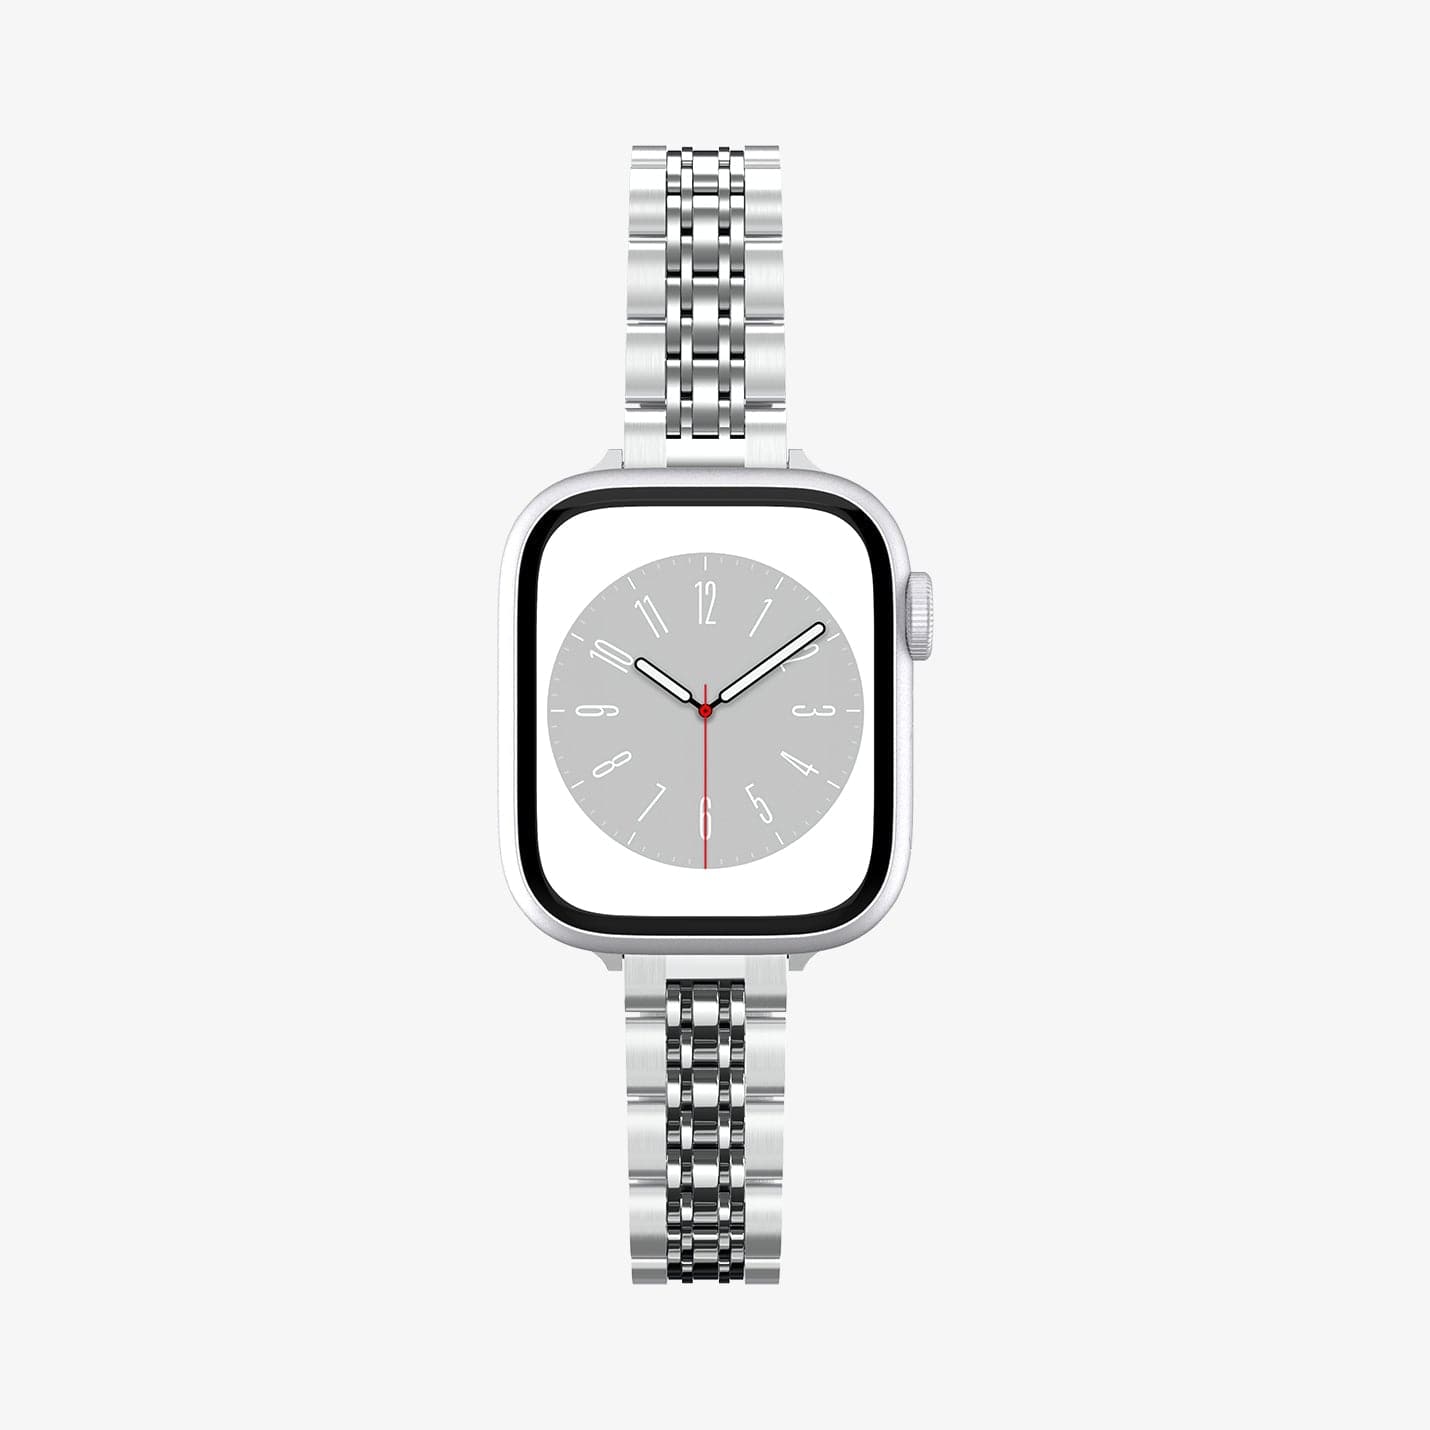 AMP06920 - Apple Watch Series Band Shine Fit in silver showing the front